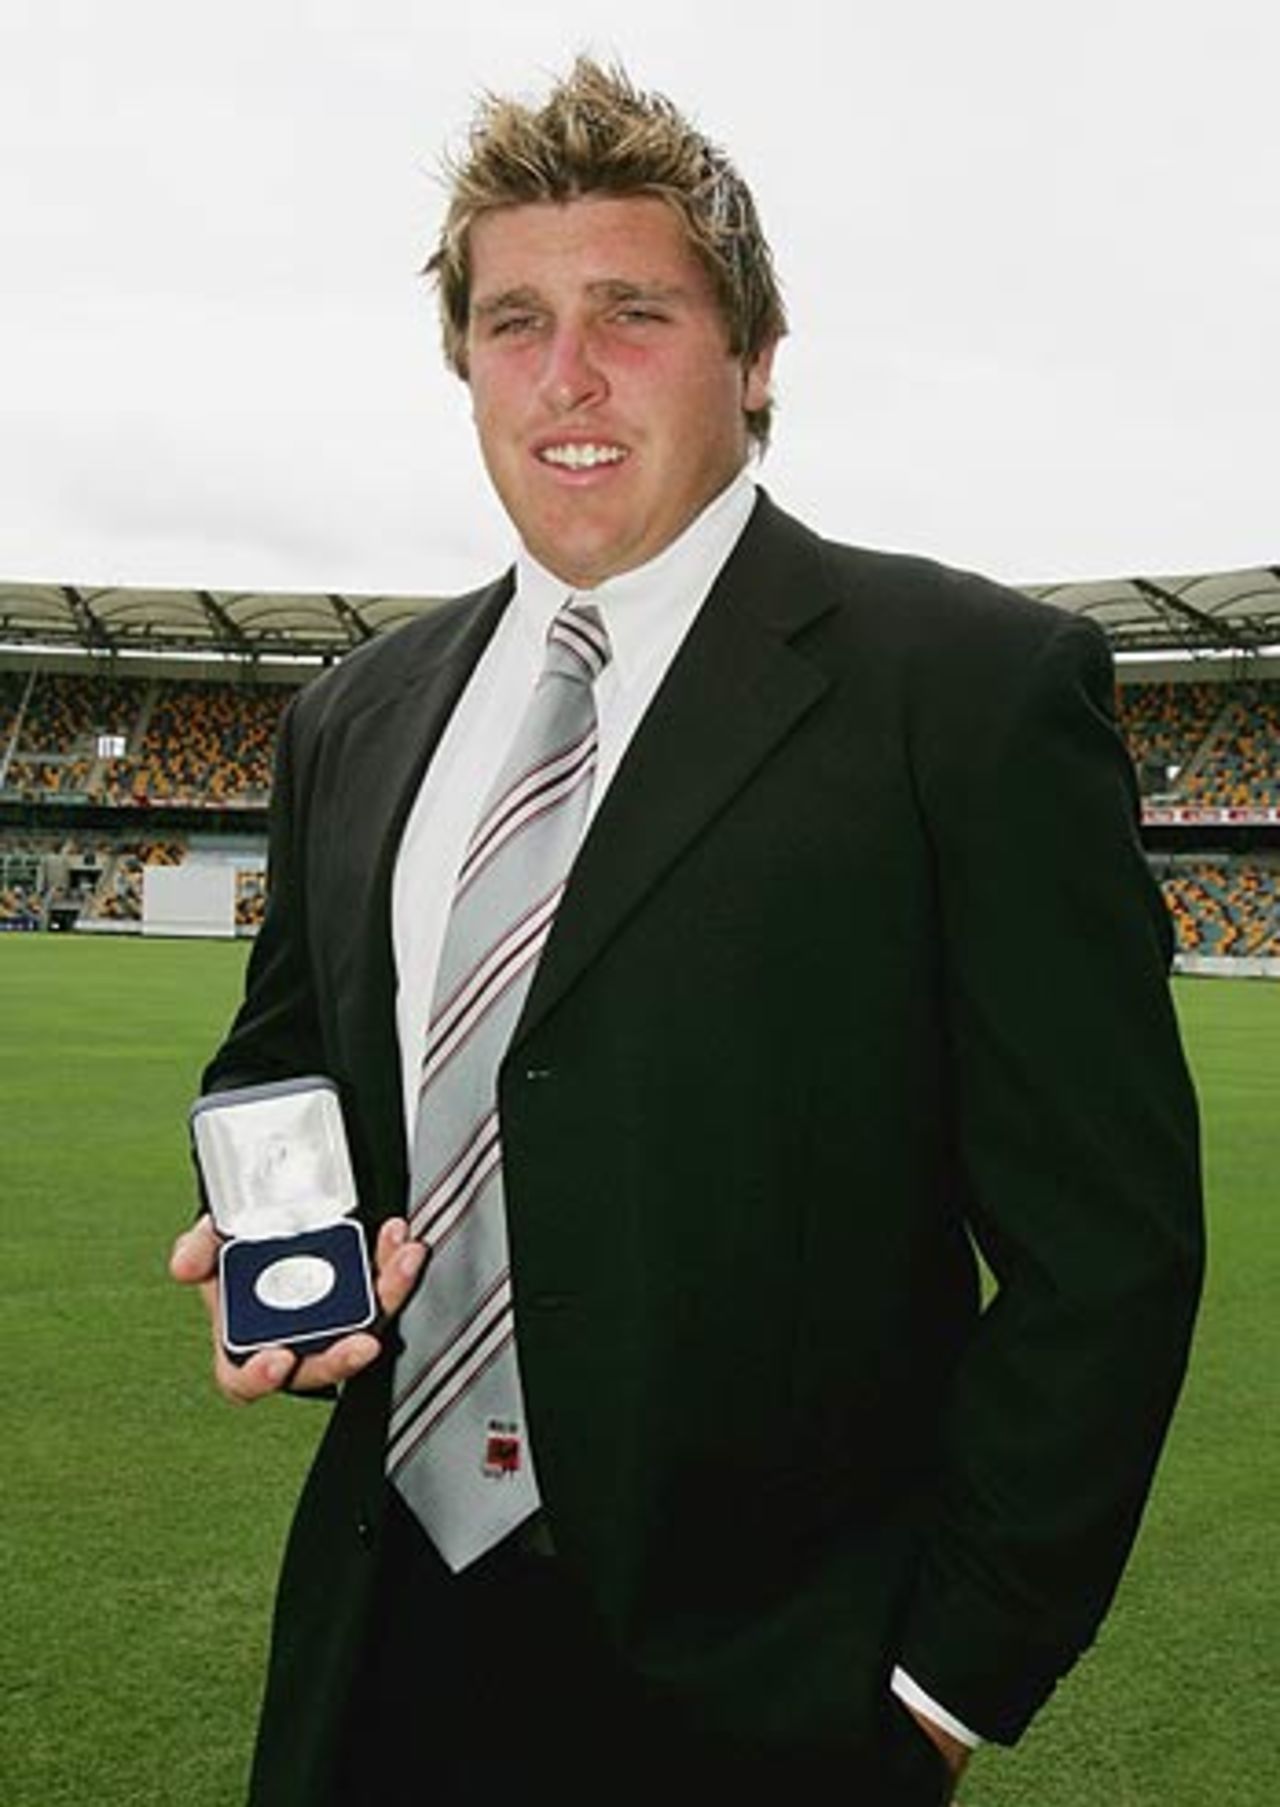 Mark Cosgrove with the ING Cup Player of the Year award,  State Cricket Awards, Woolloongabba, Brisbane, March 22 2006